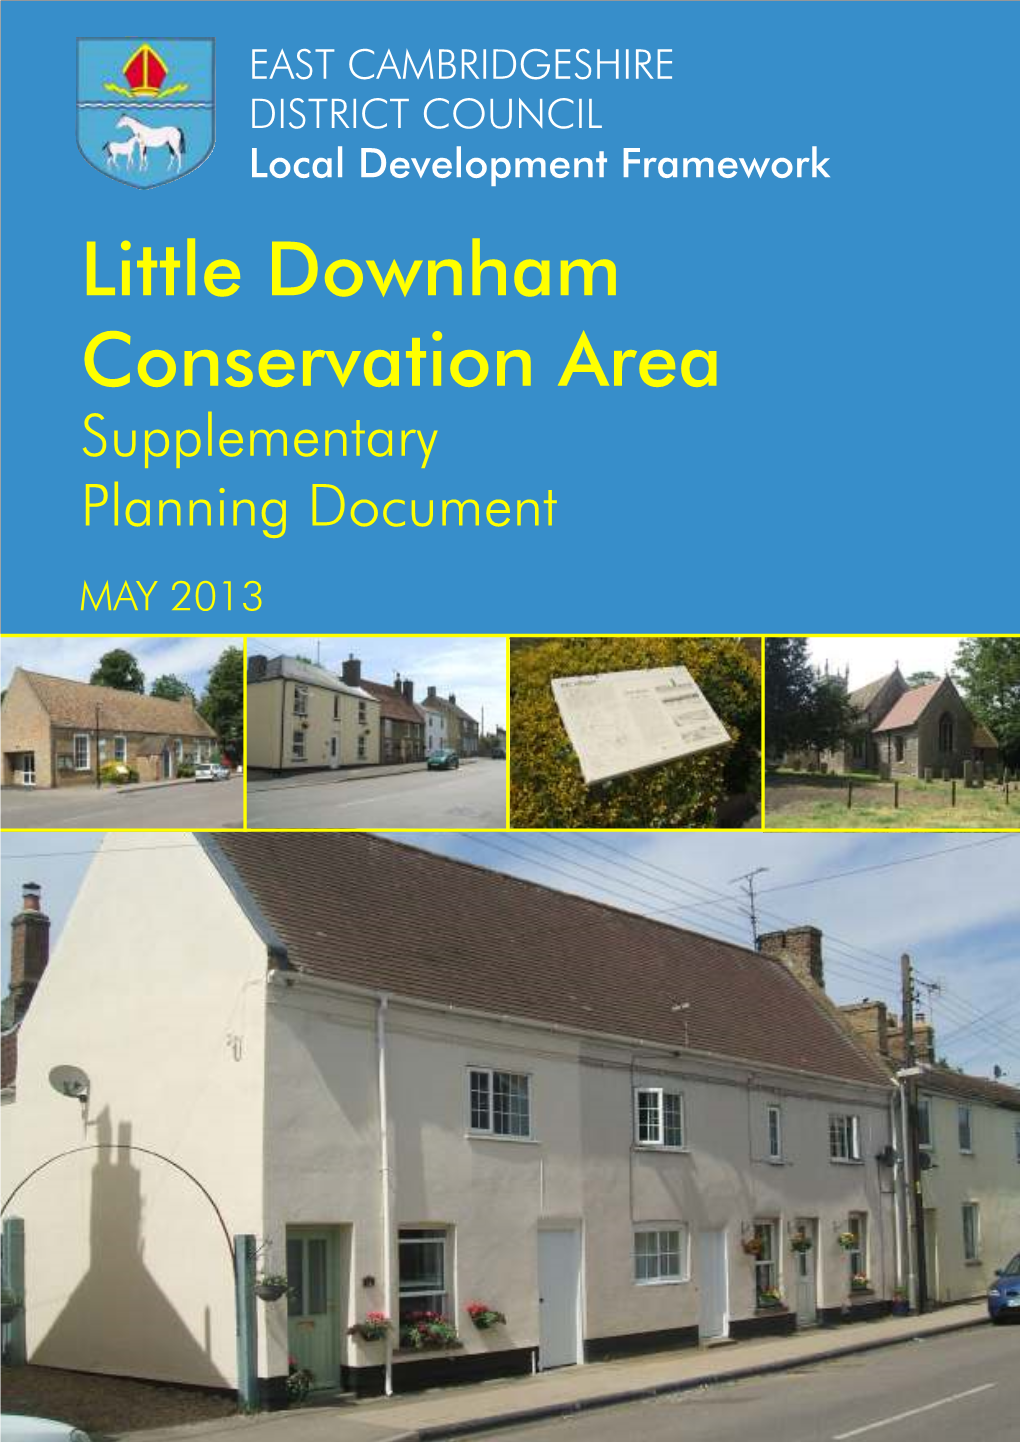 Little Downham Conservation Area Supplementary Planning Document MAY 2013 1 Introduction